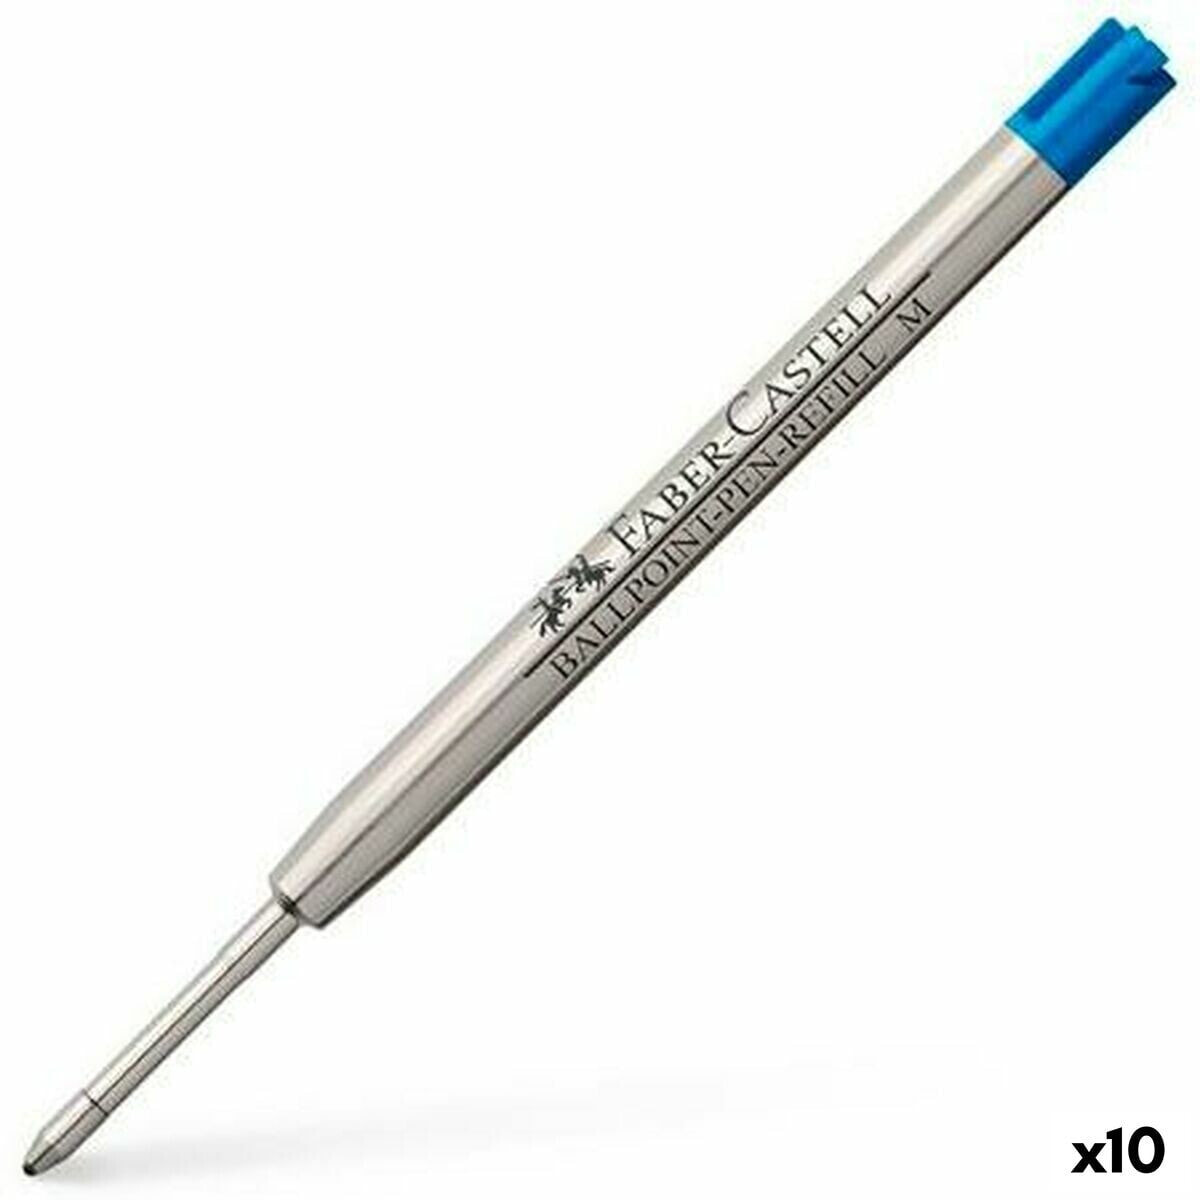 Replacements Faber-Castell 148741 Pen (10 Units)